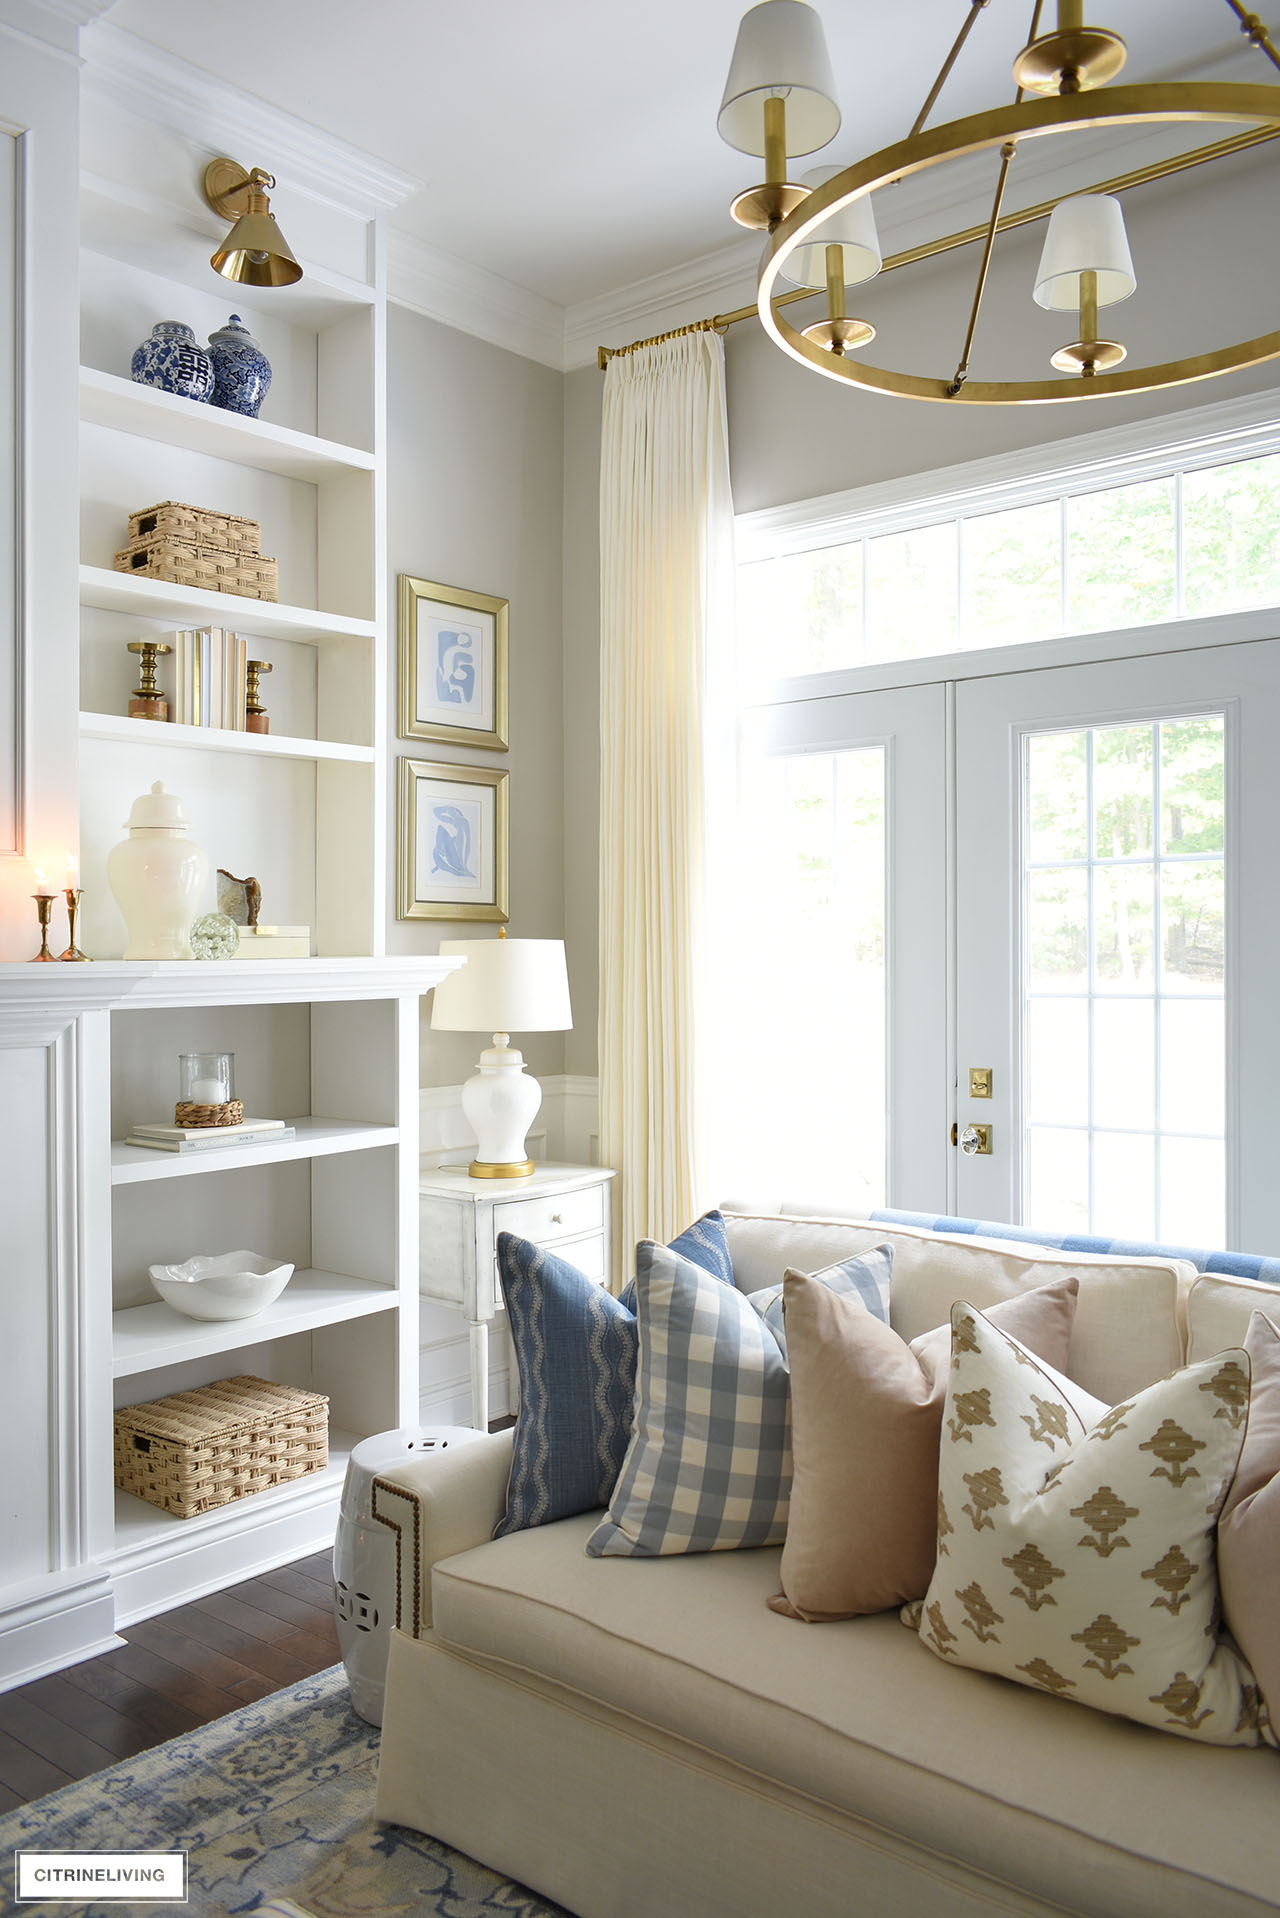 Living room corner with a white ginger jar lamp, bookshelves styled with simple decor